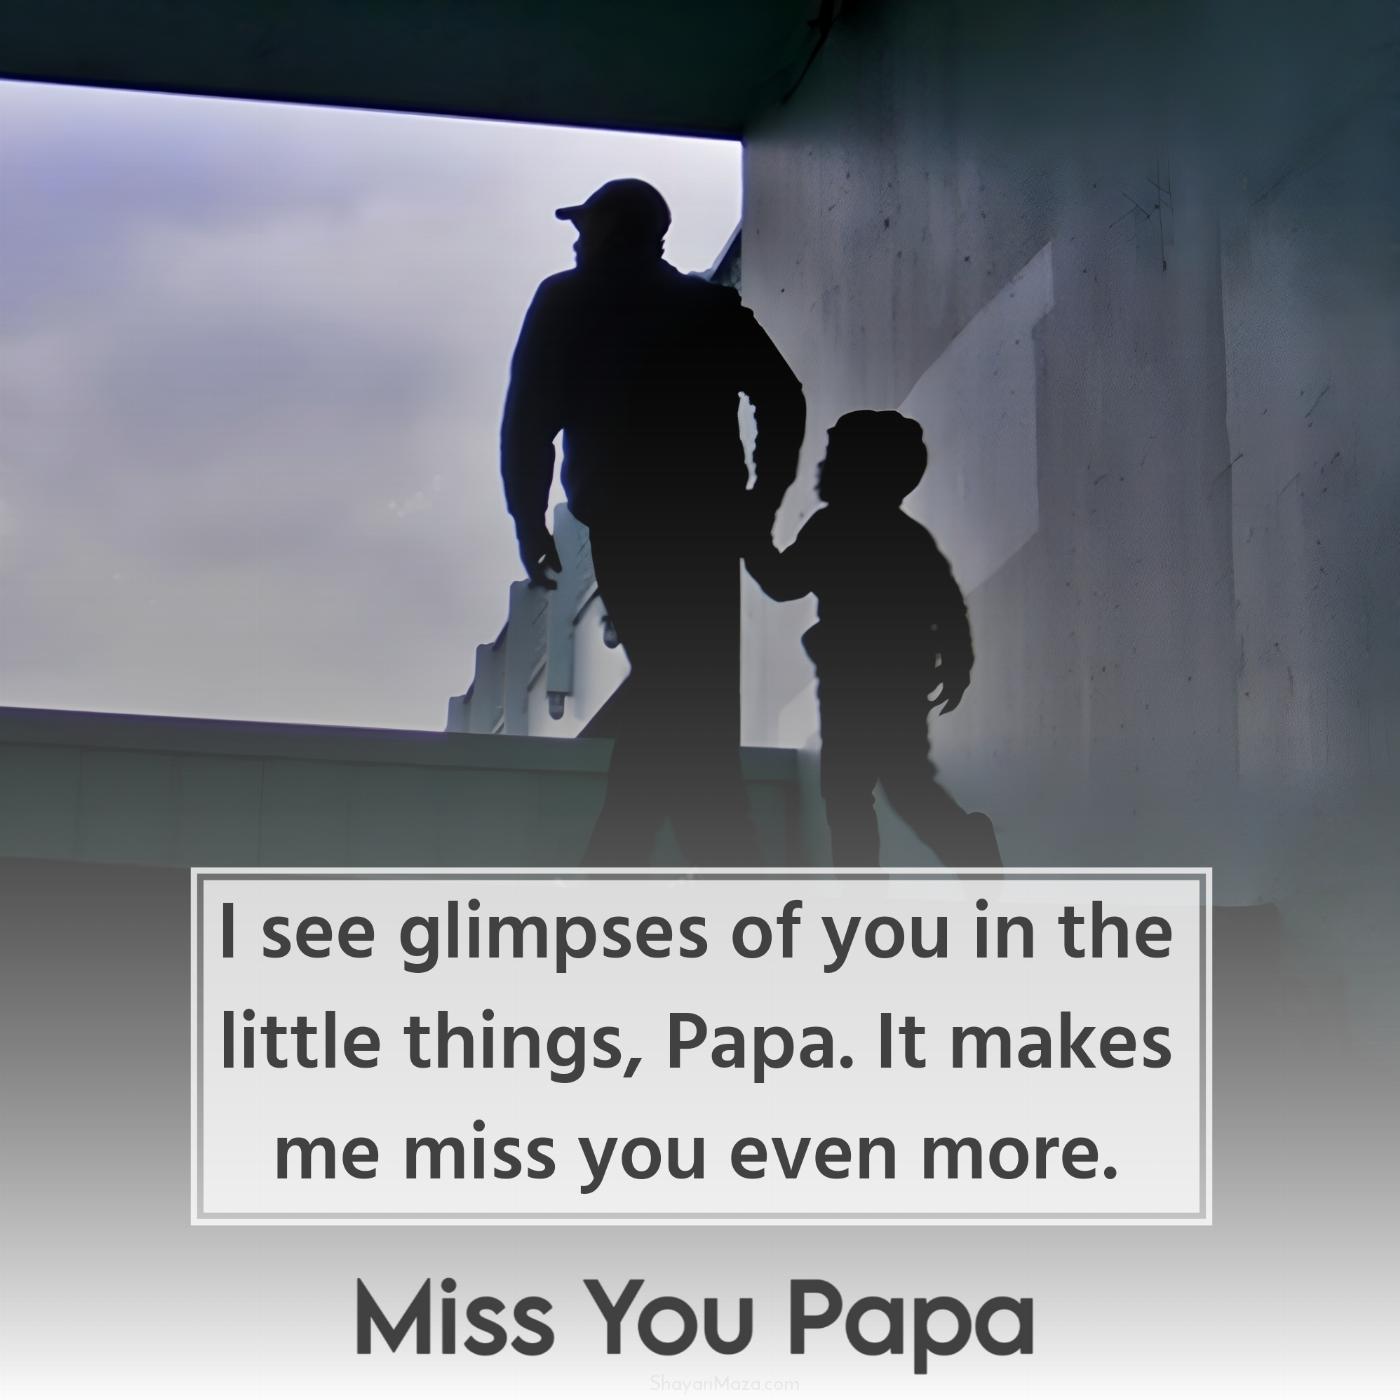 I see glimpses of you in the little things Papa